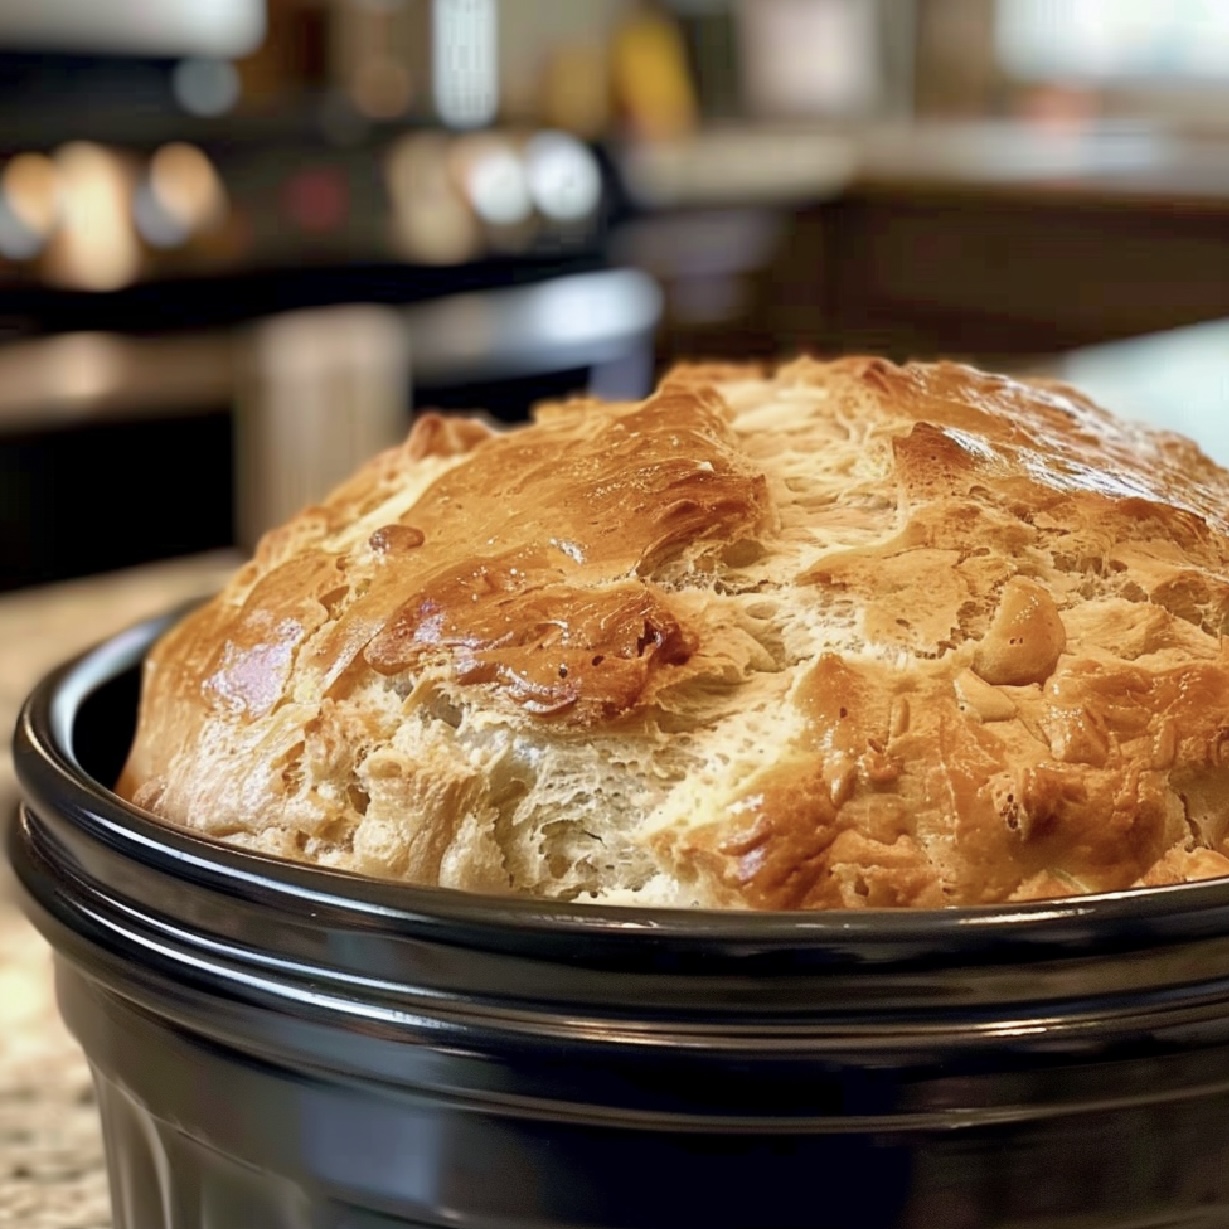 2-Ingredient Wonder Bread, Slow Cooker Beer Bread that’s effortlessly delicious and perfect for beginners. Try it now!